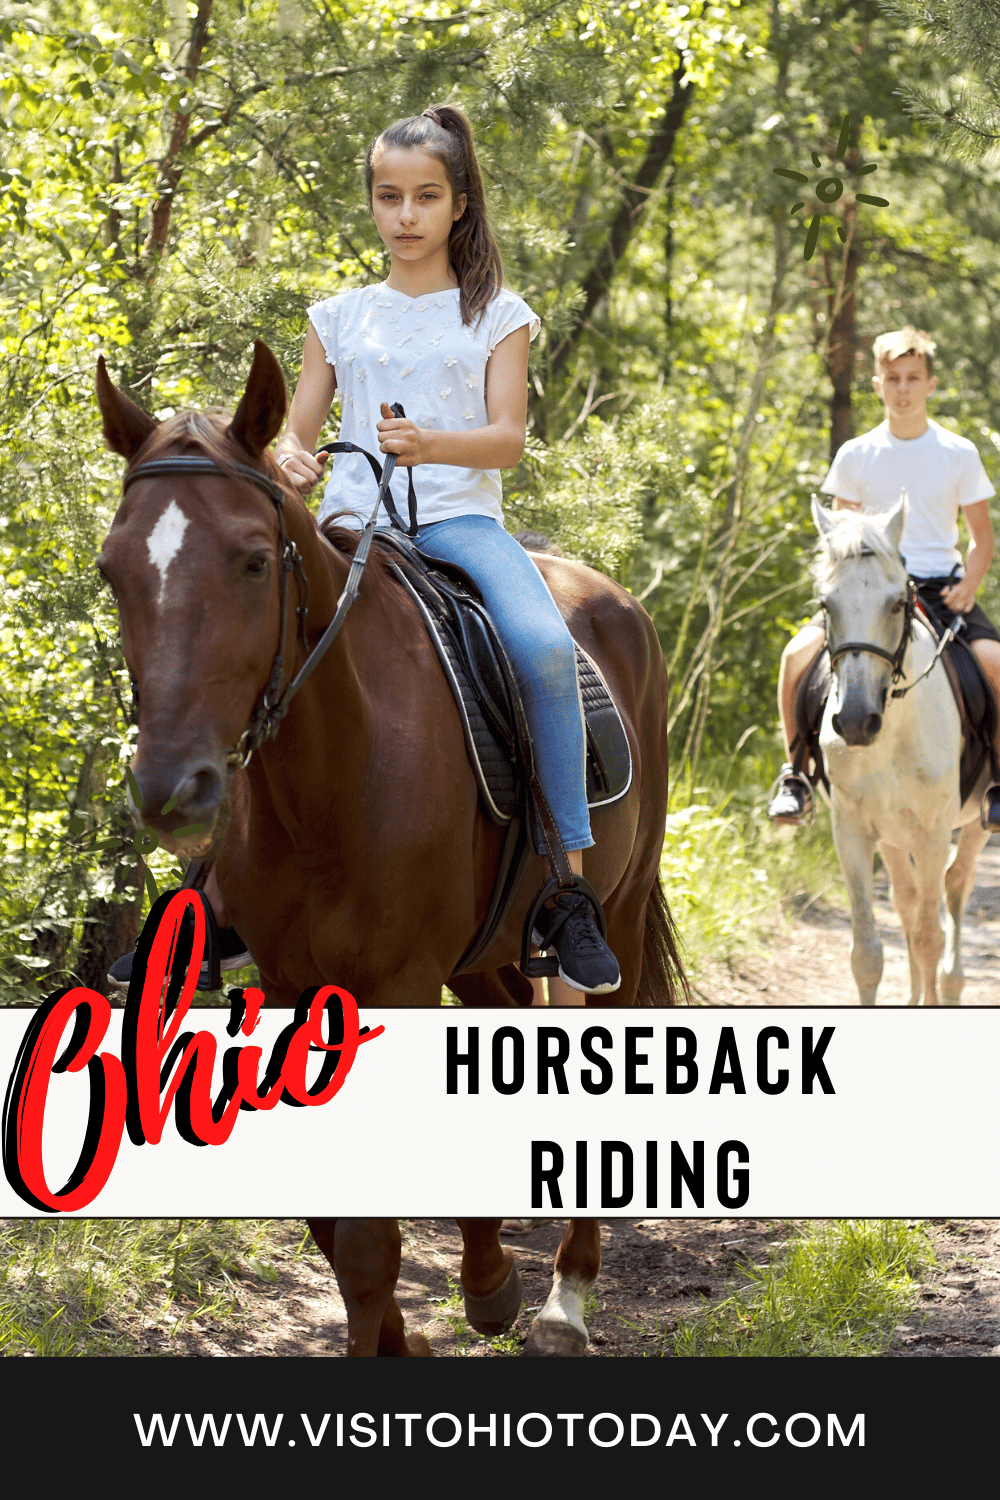 Two horses being ridden by females. Text overlay says Ohio horseback riding